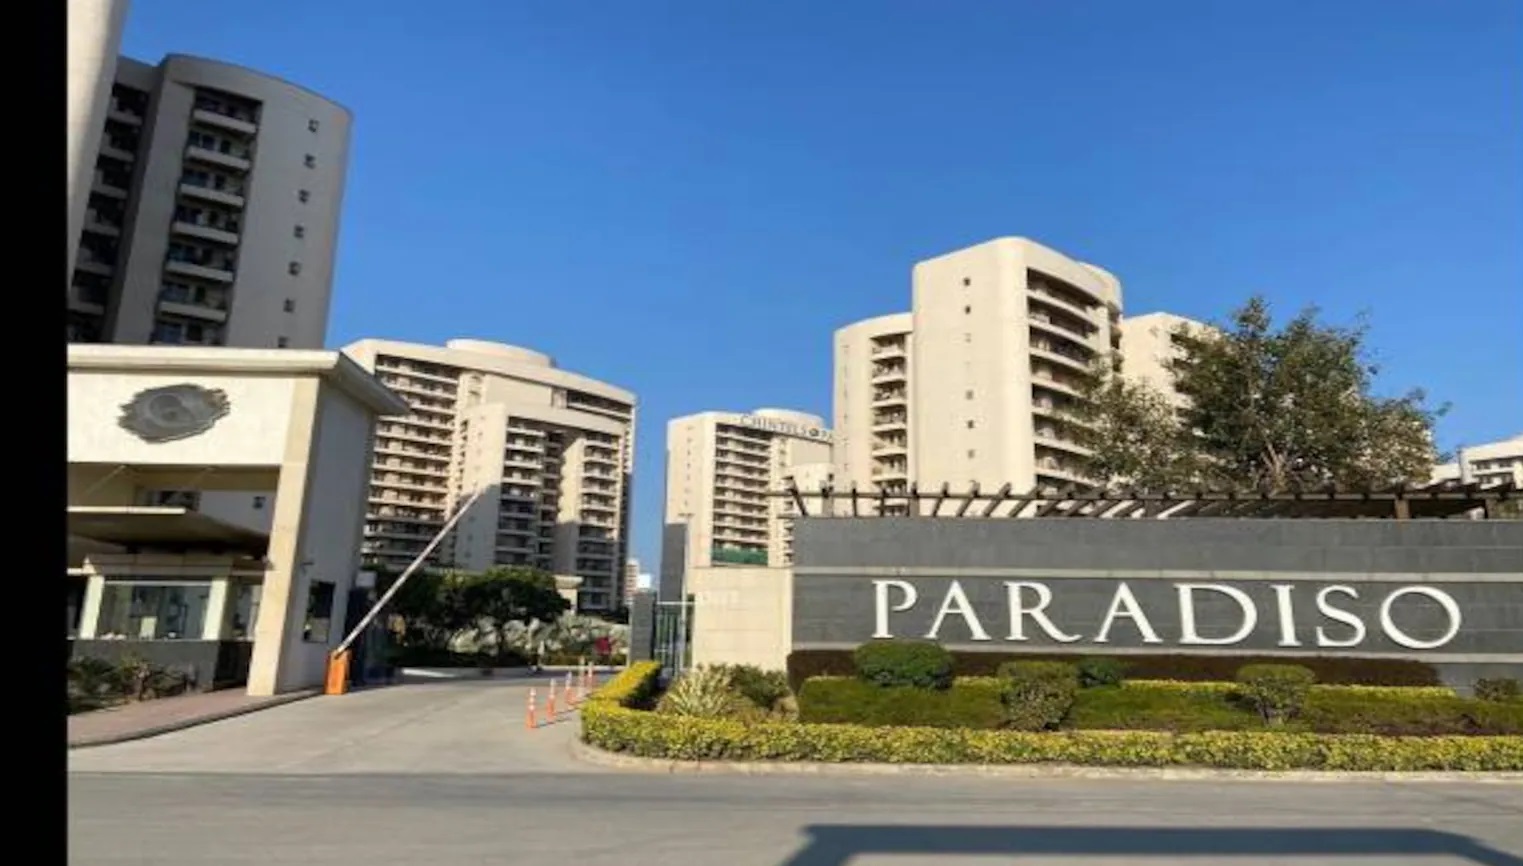 Gurugram administration issues order to demolish five unsafe towers in Chintels Paradiso